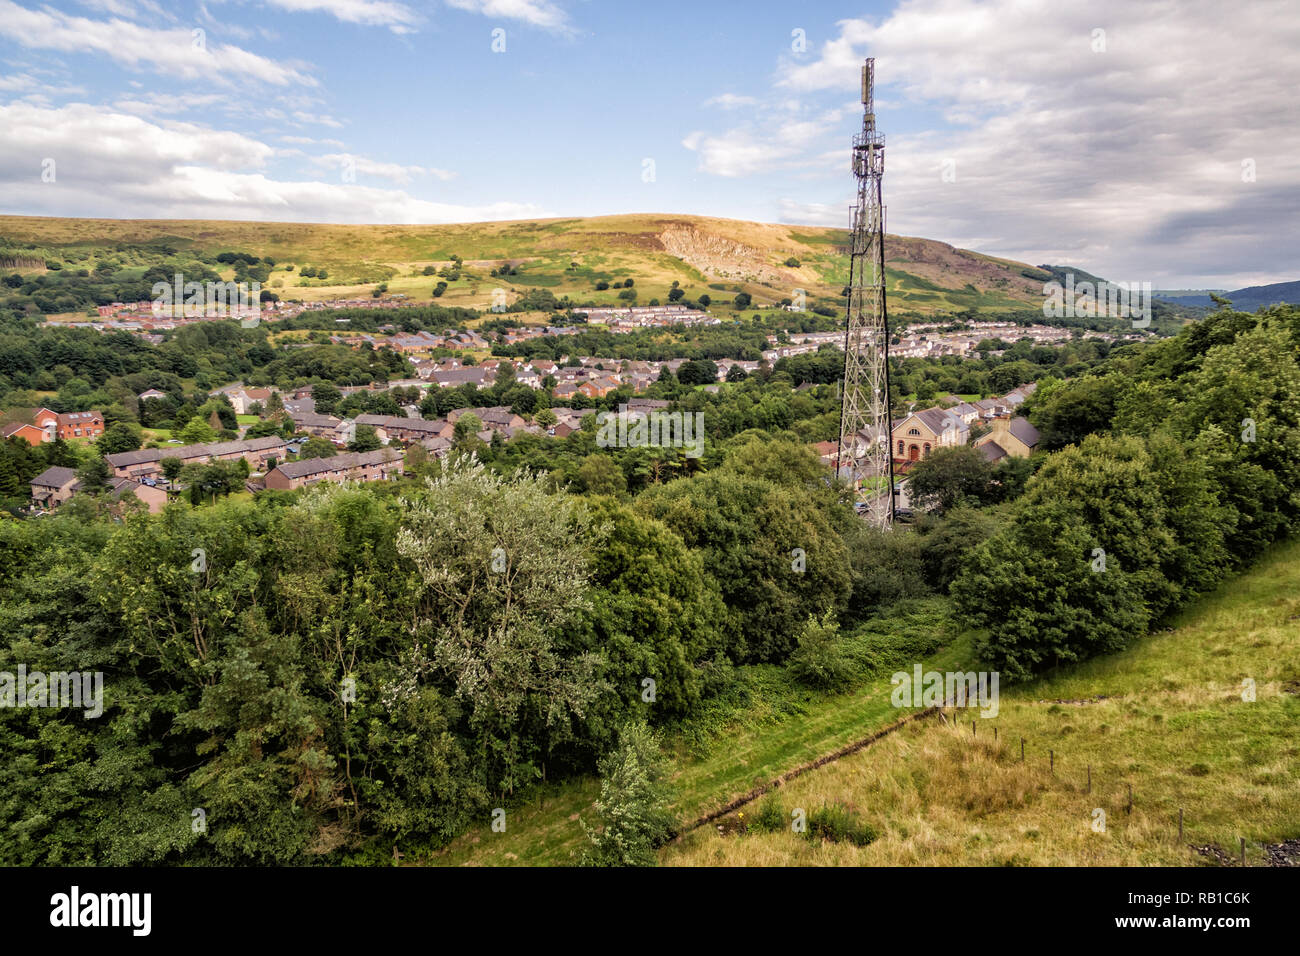 Telecommunications tower. Mobile phone and TV base station in a Small Welsh Town Blaina Stock Photo